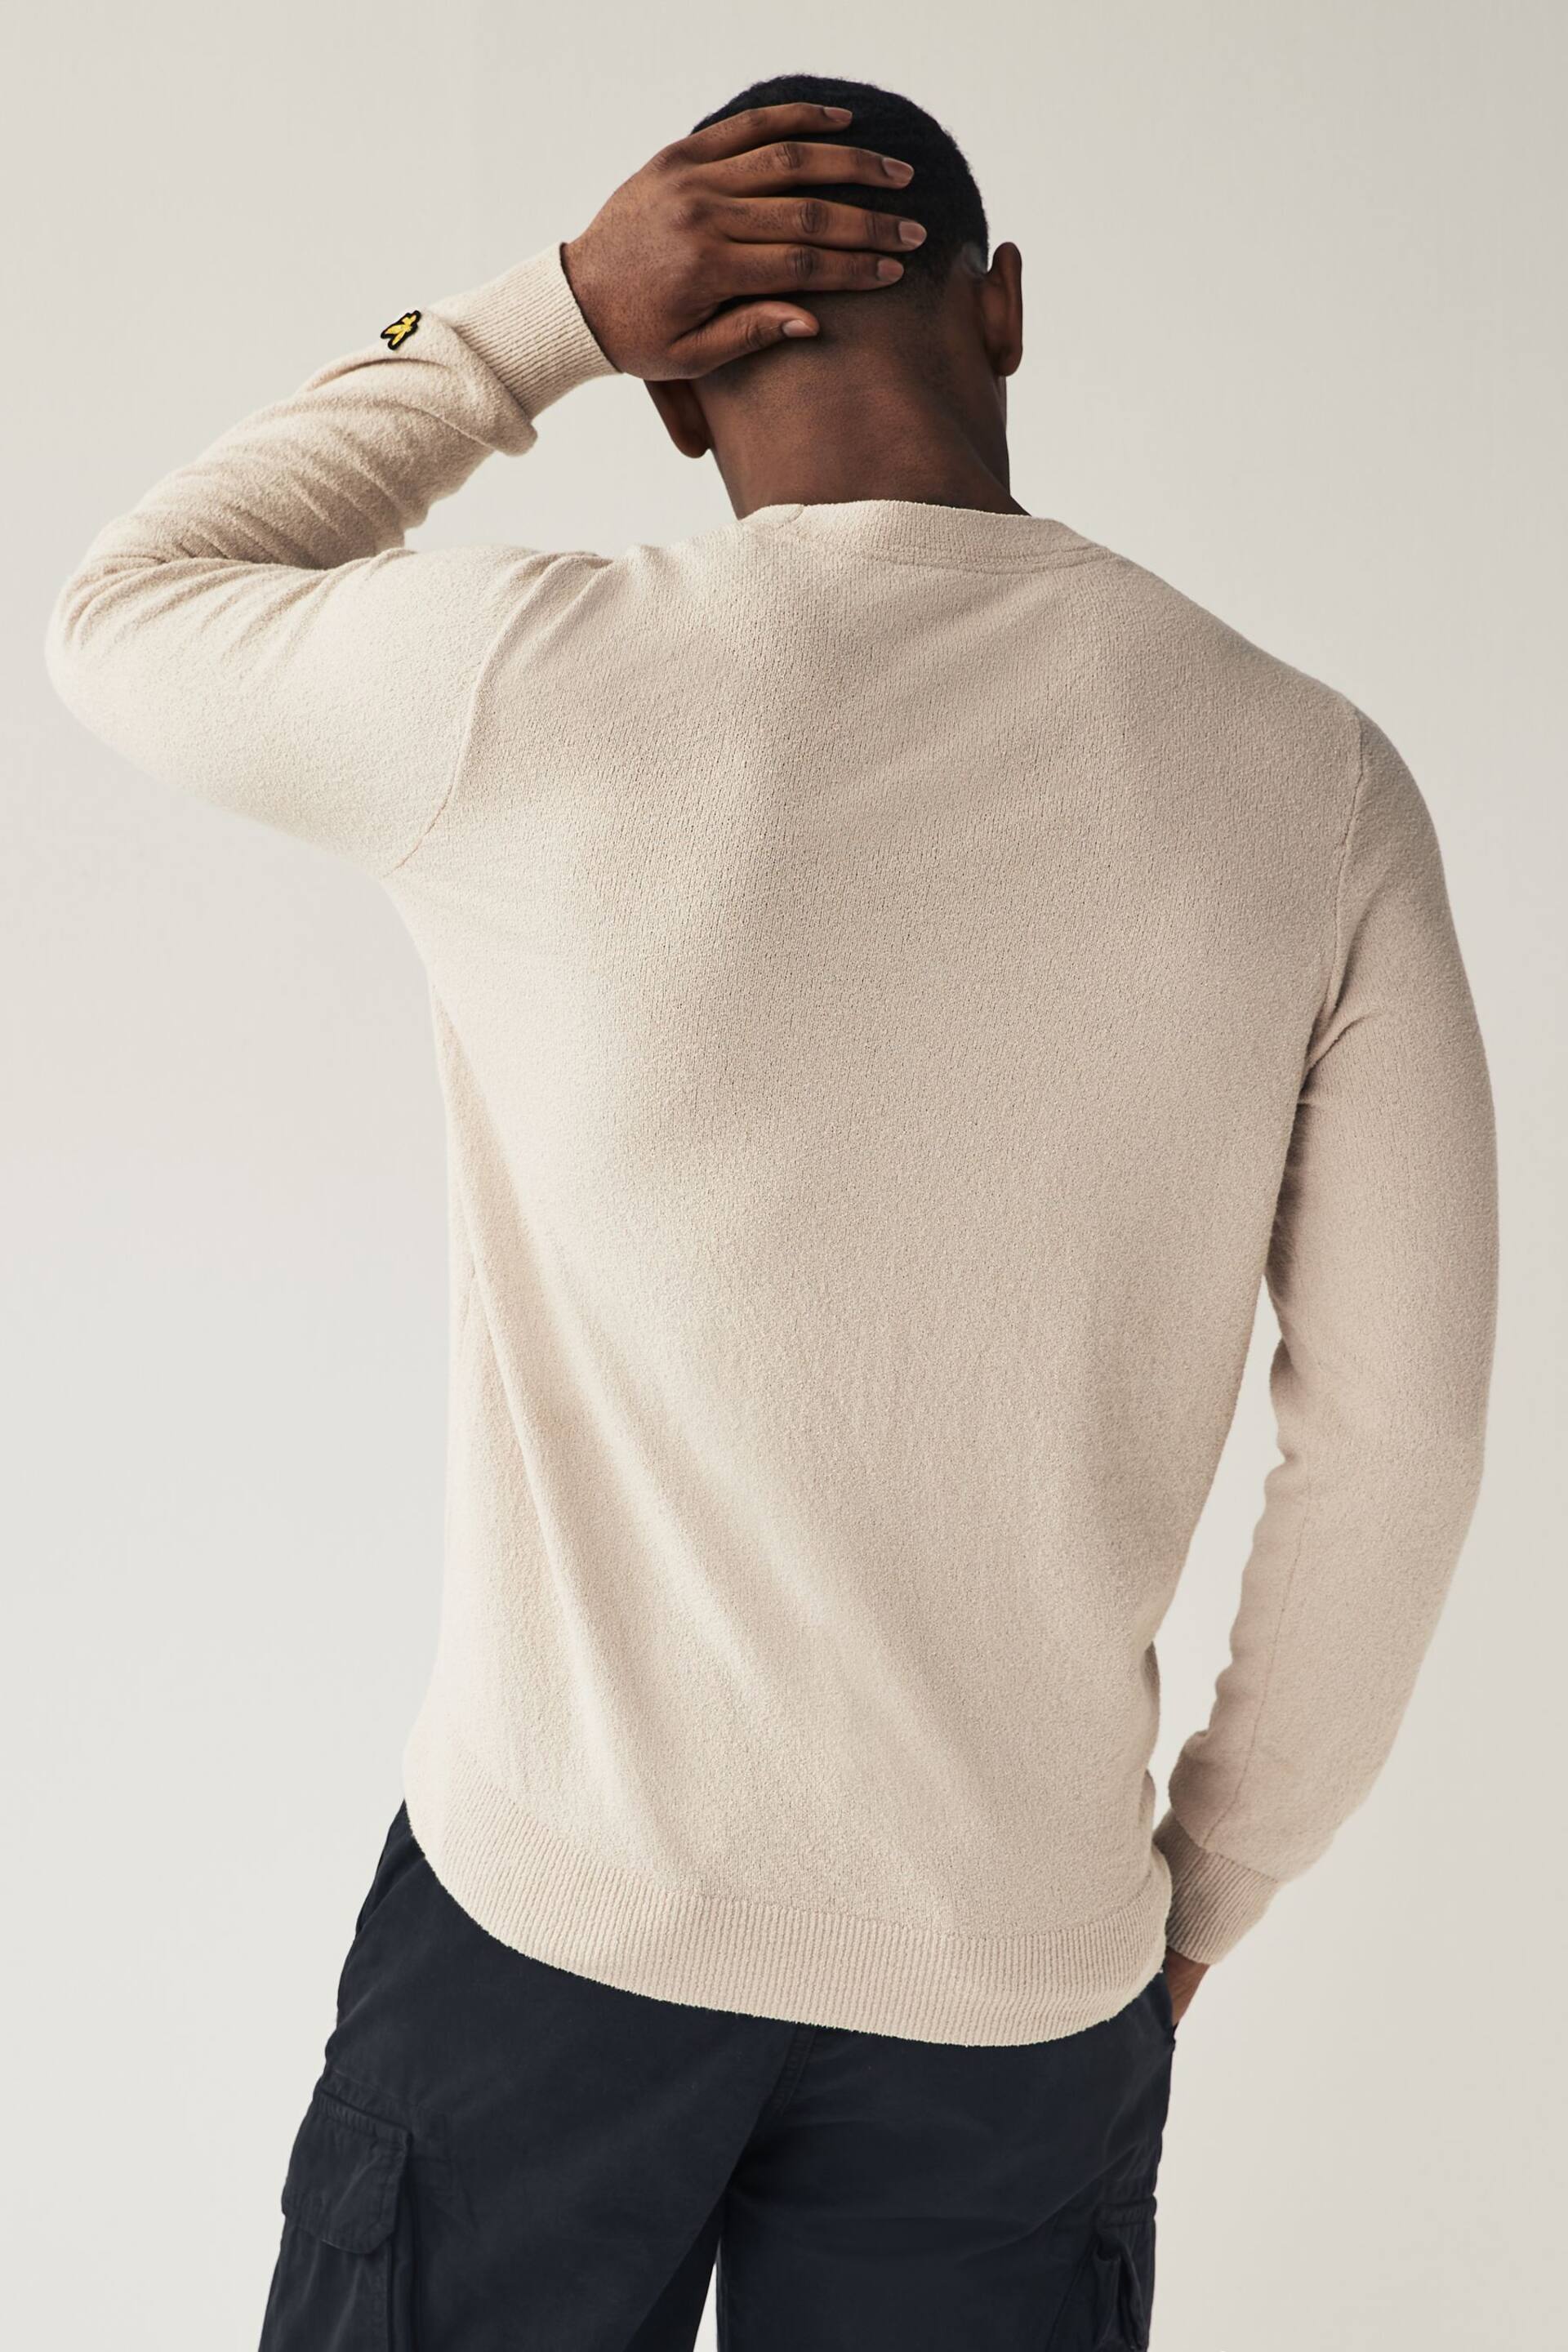 Lyle & Scott Natural Boucle Knitted Jumper - Image 2 of 5